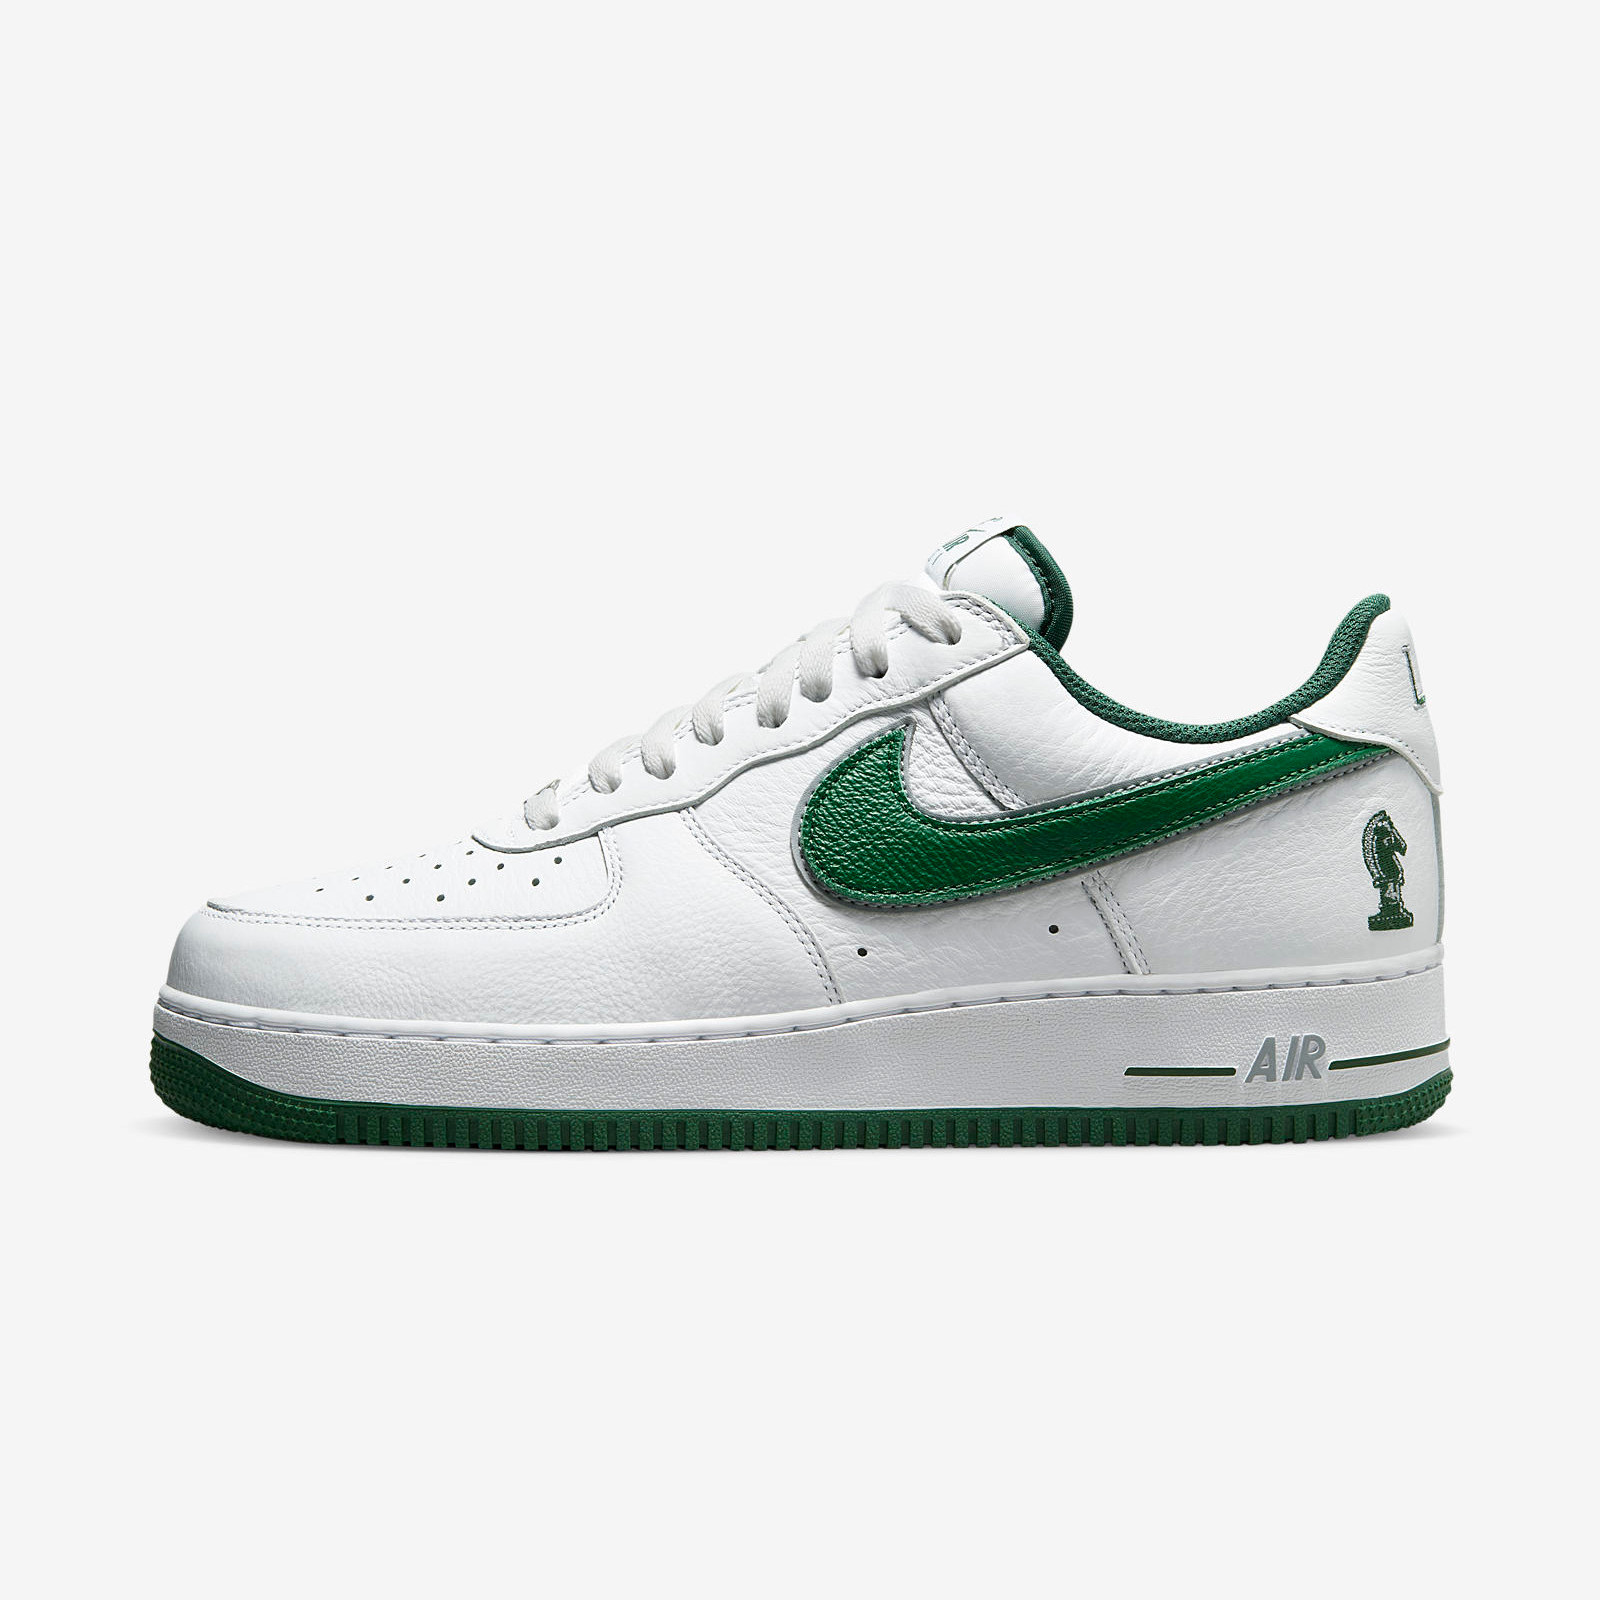 Nike Air Force 1 Low
White / Deep Forest